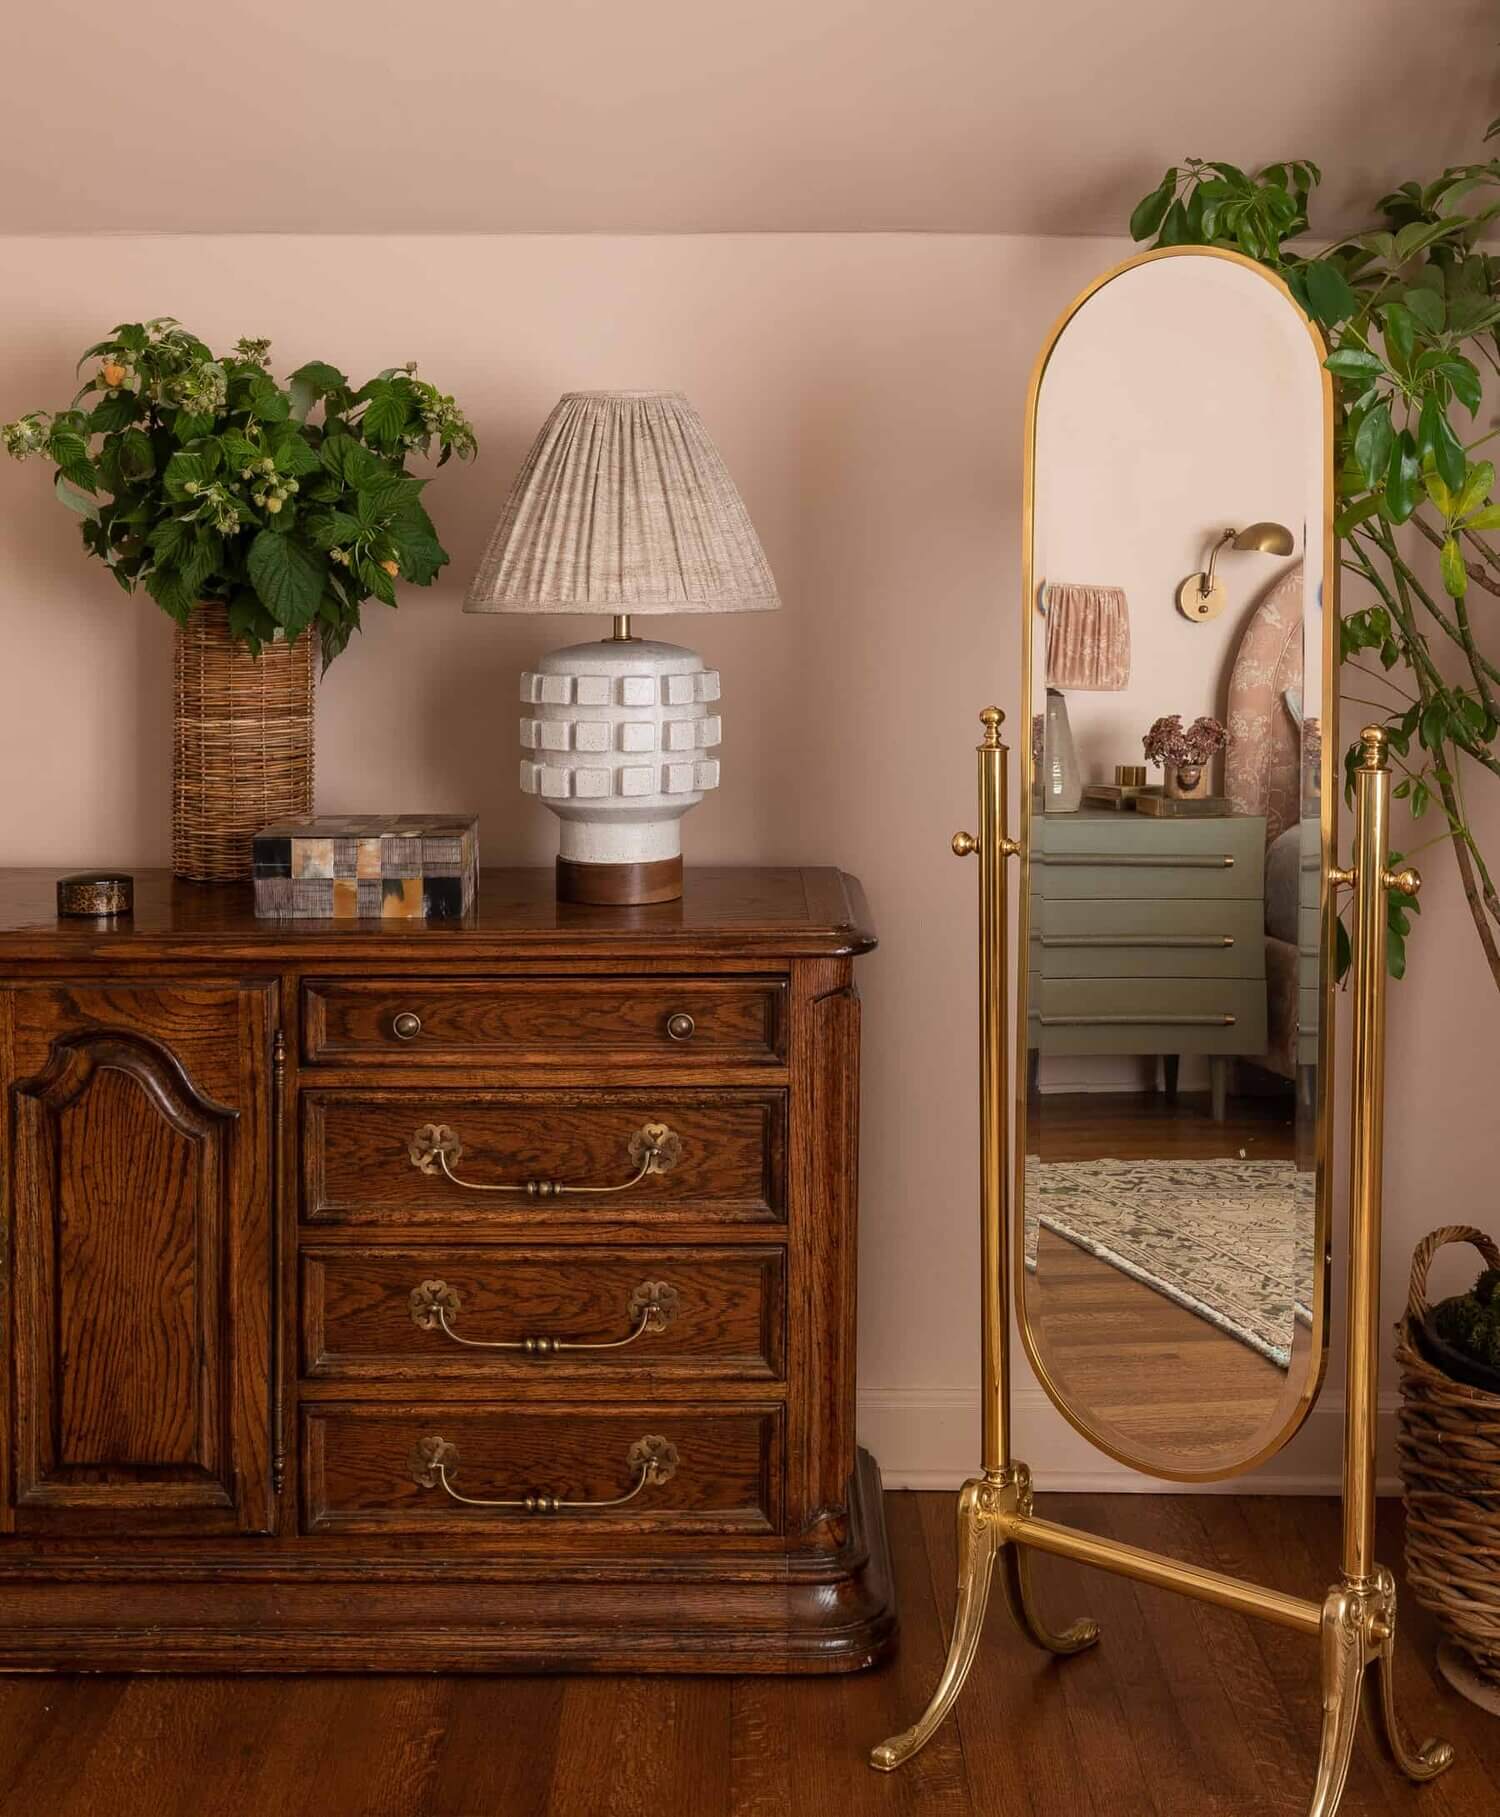 BlushpinkbedroomindesignerHeidiCailliersWashingtonhome TheNordroom2 Soothing Colors in Designer Heidi Caillier's Eclectic Washington Home